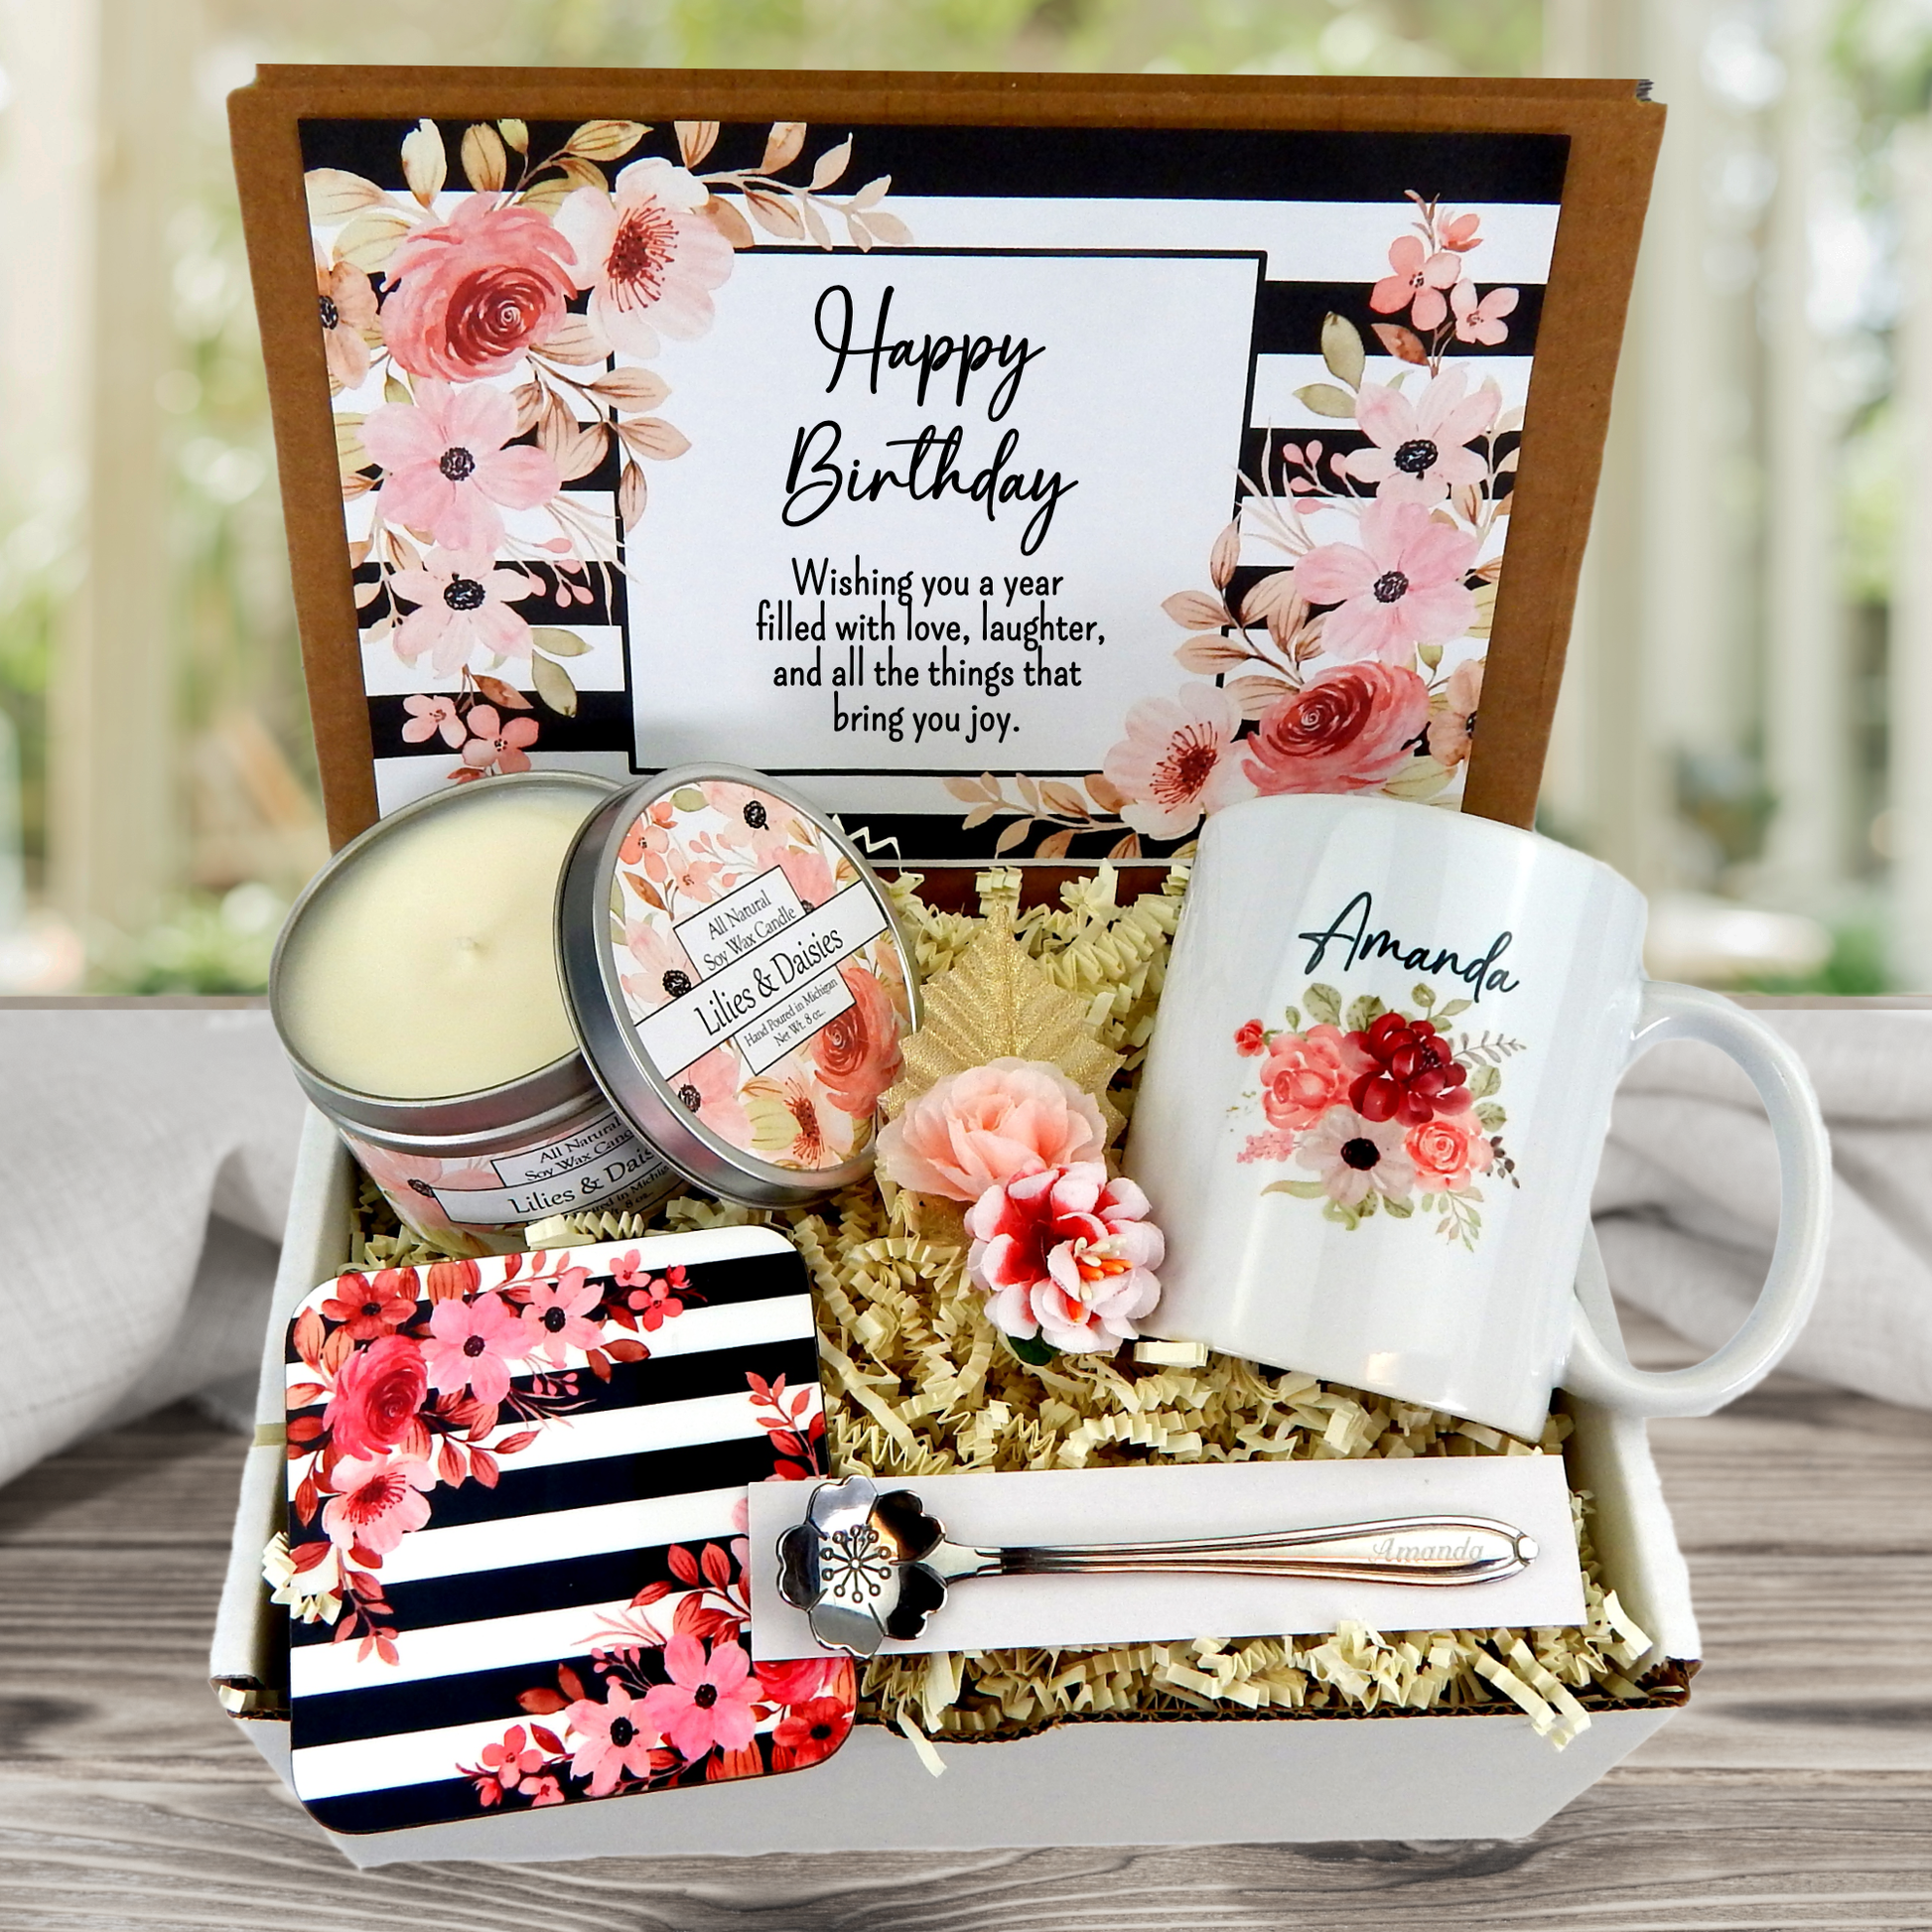 pink floral themed birthday present customized with her name on a mug and spoon